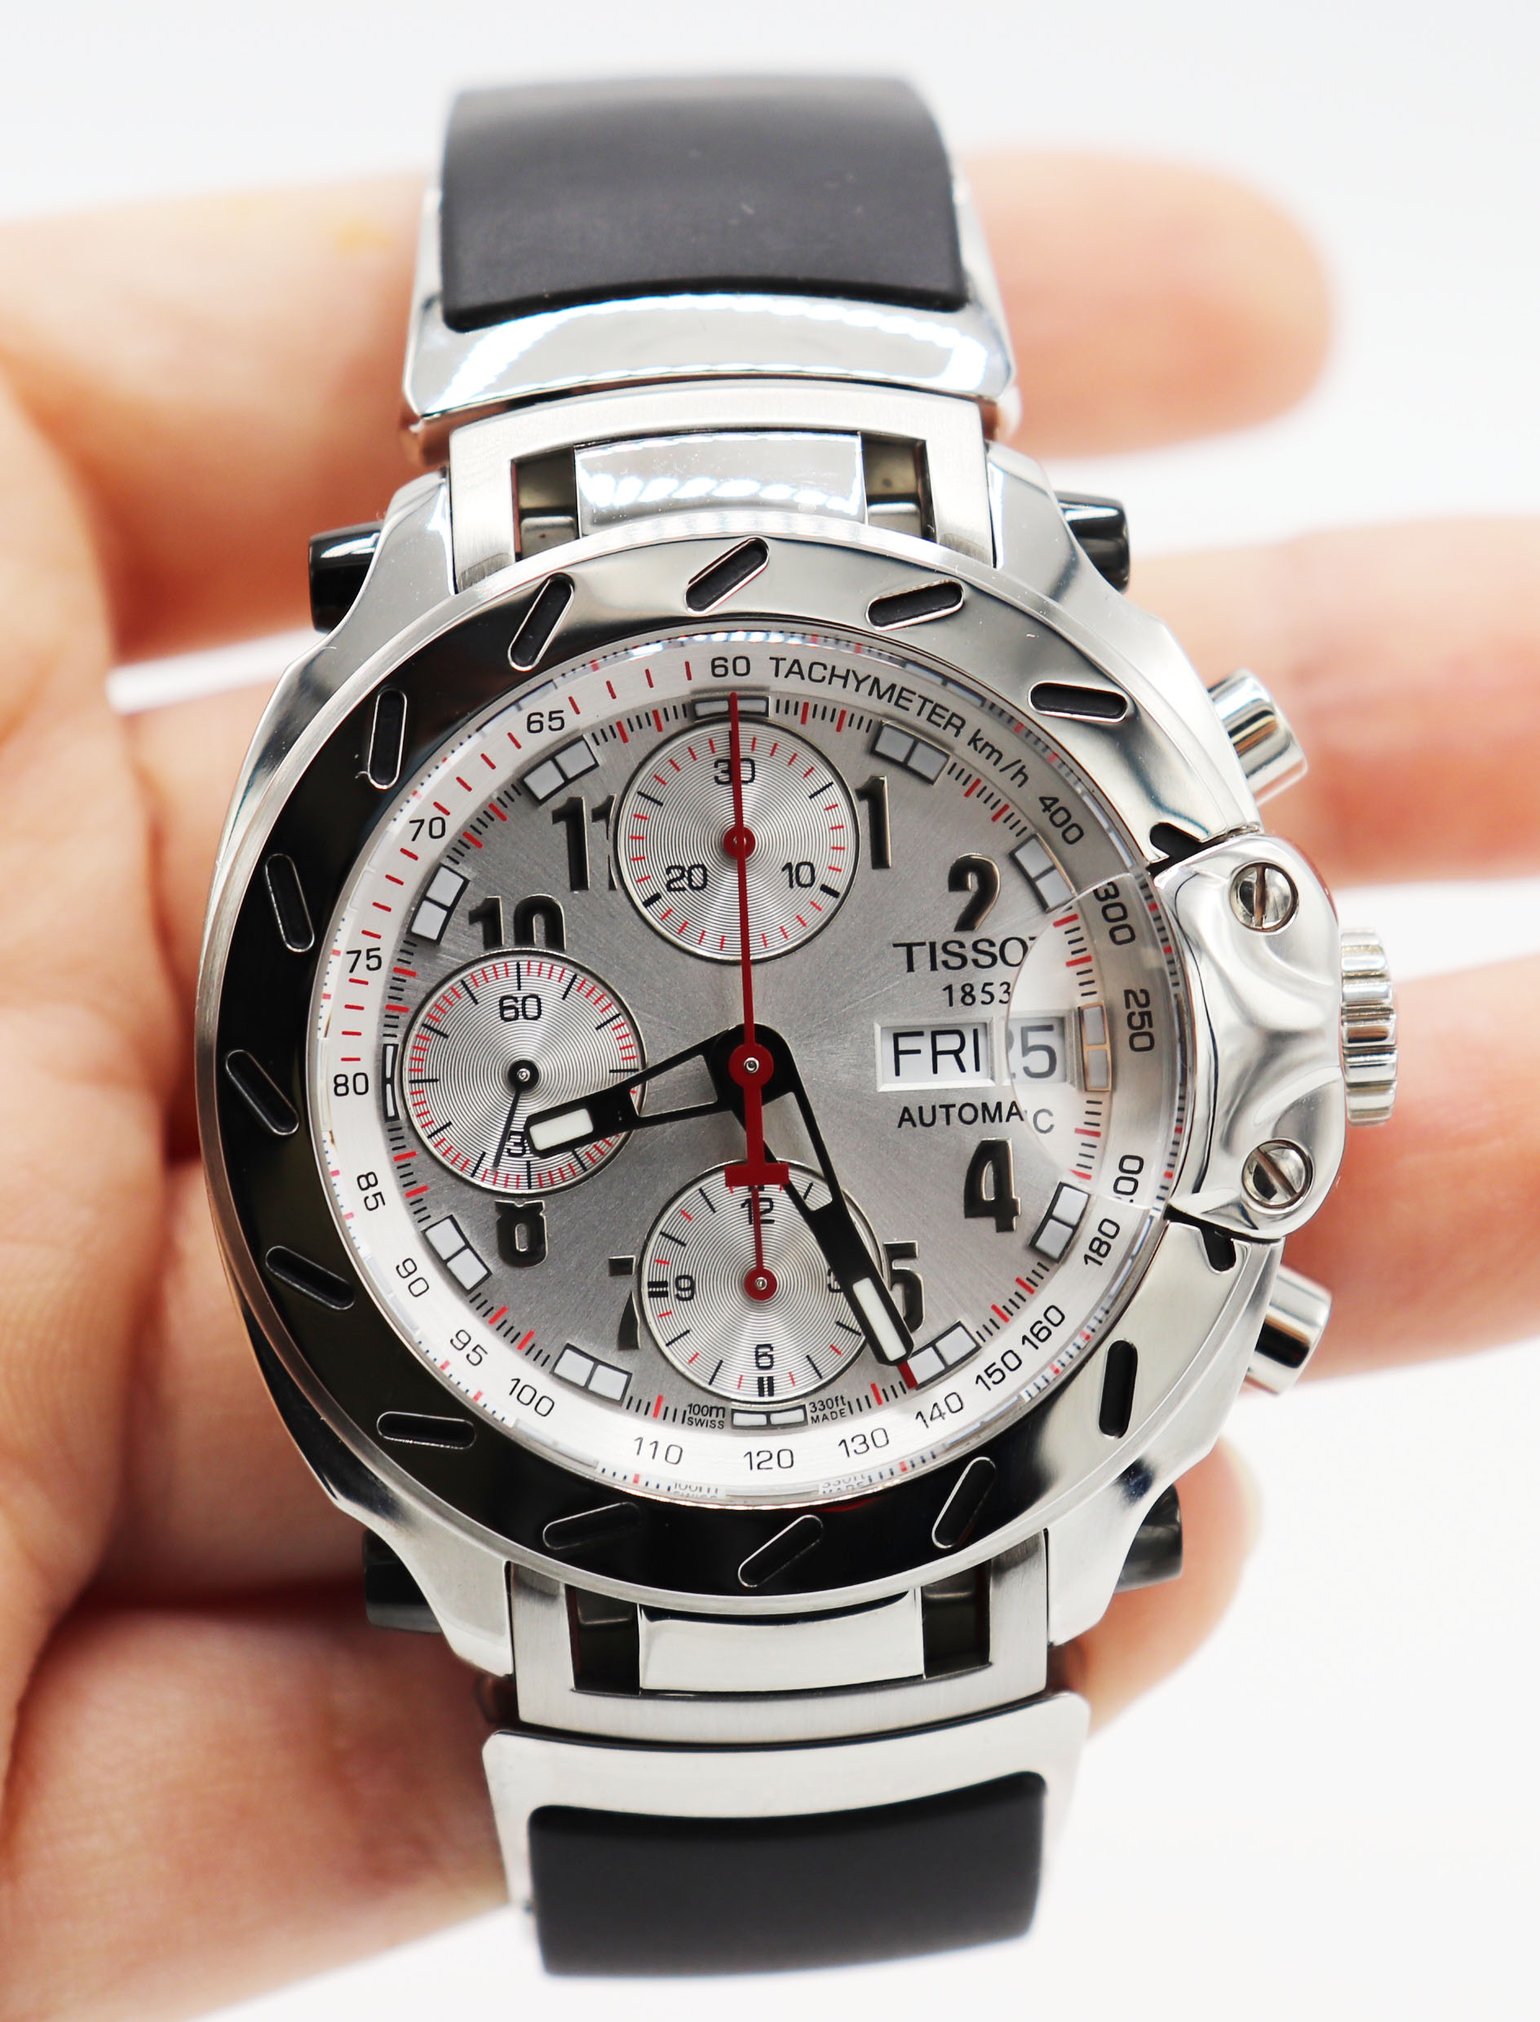 Men's Tissot Automatic Chronograph Watch, Stainless Steel, T-Race